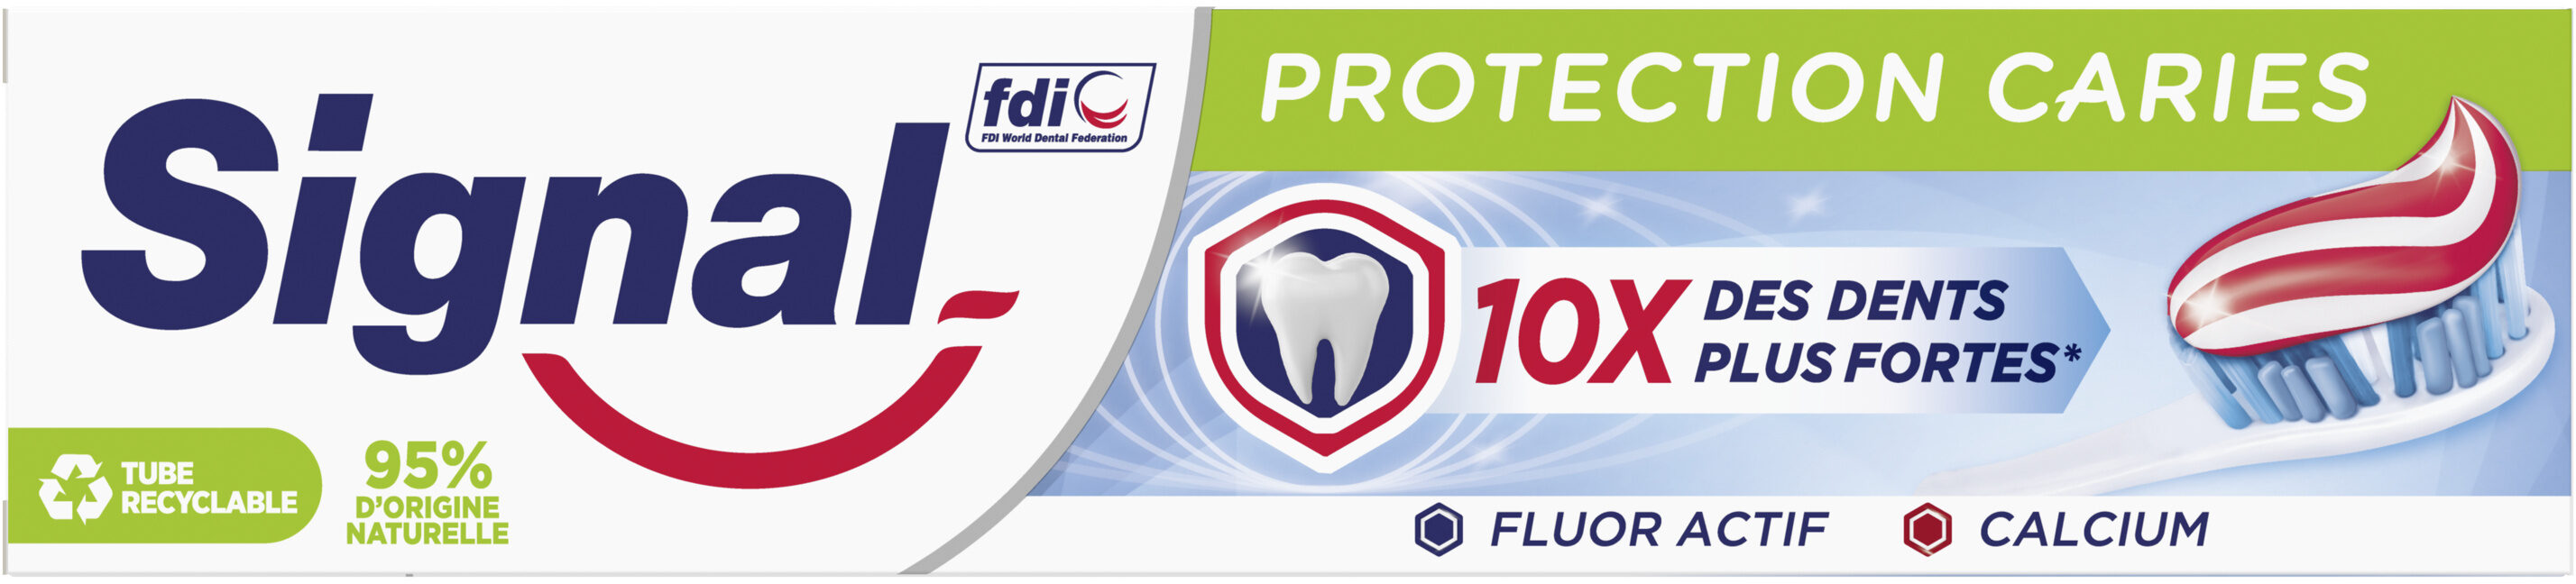 Signal Dentifrice Protection Caries 125ml - نتاج - fr